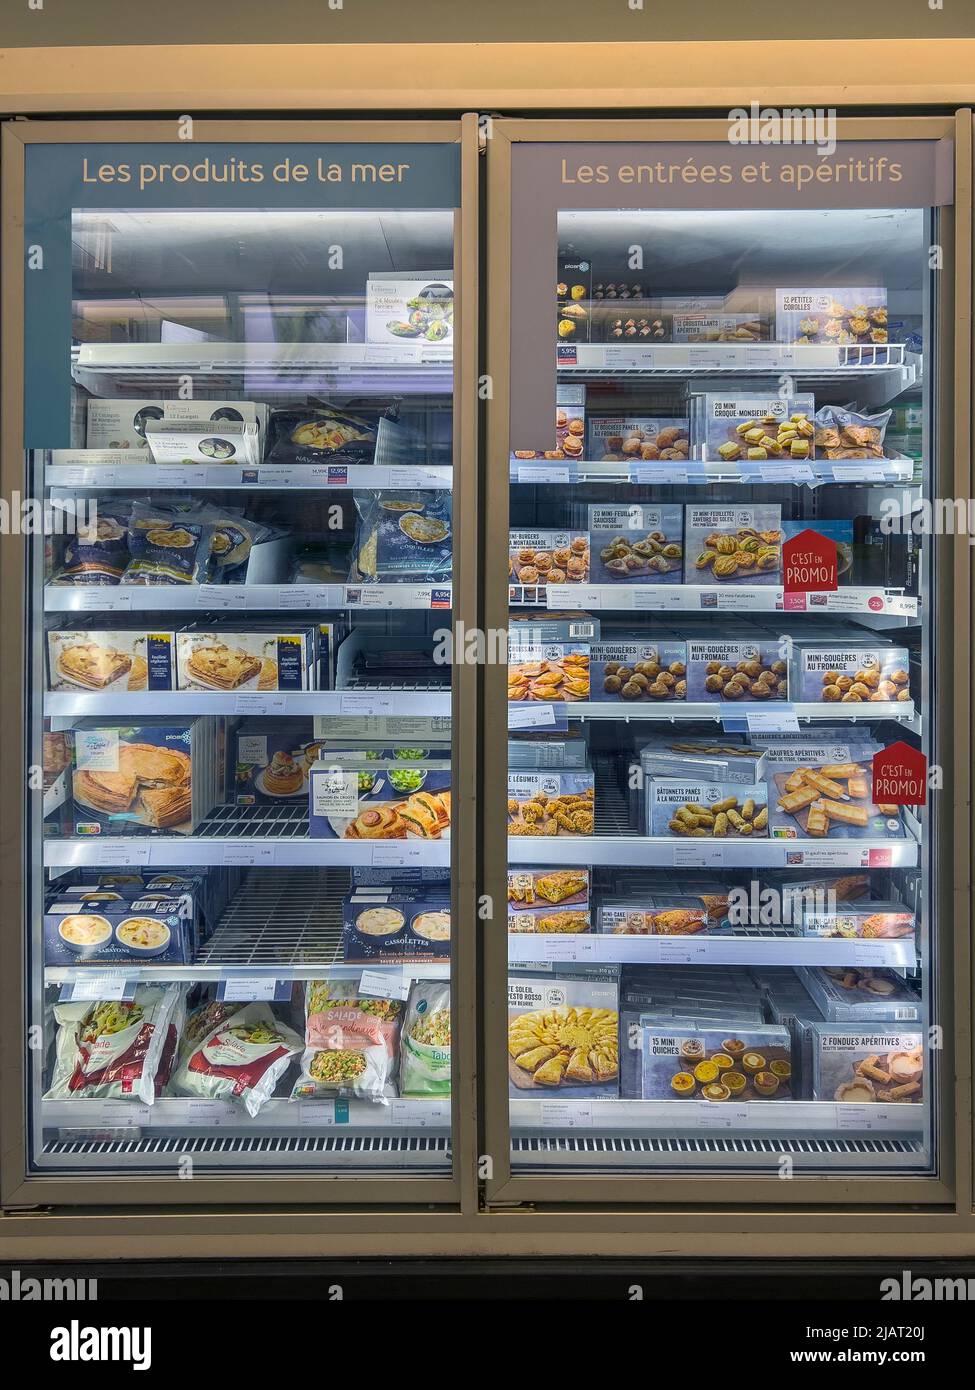 Paris, France - April 6, 2022: Variety of frozen food at supermarket refrigerator. Sea food products in french language 'Les Produits De La Mer' Stock Photo